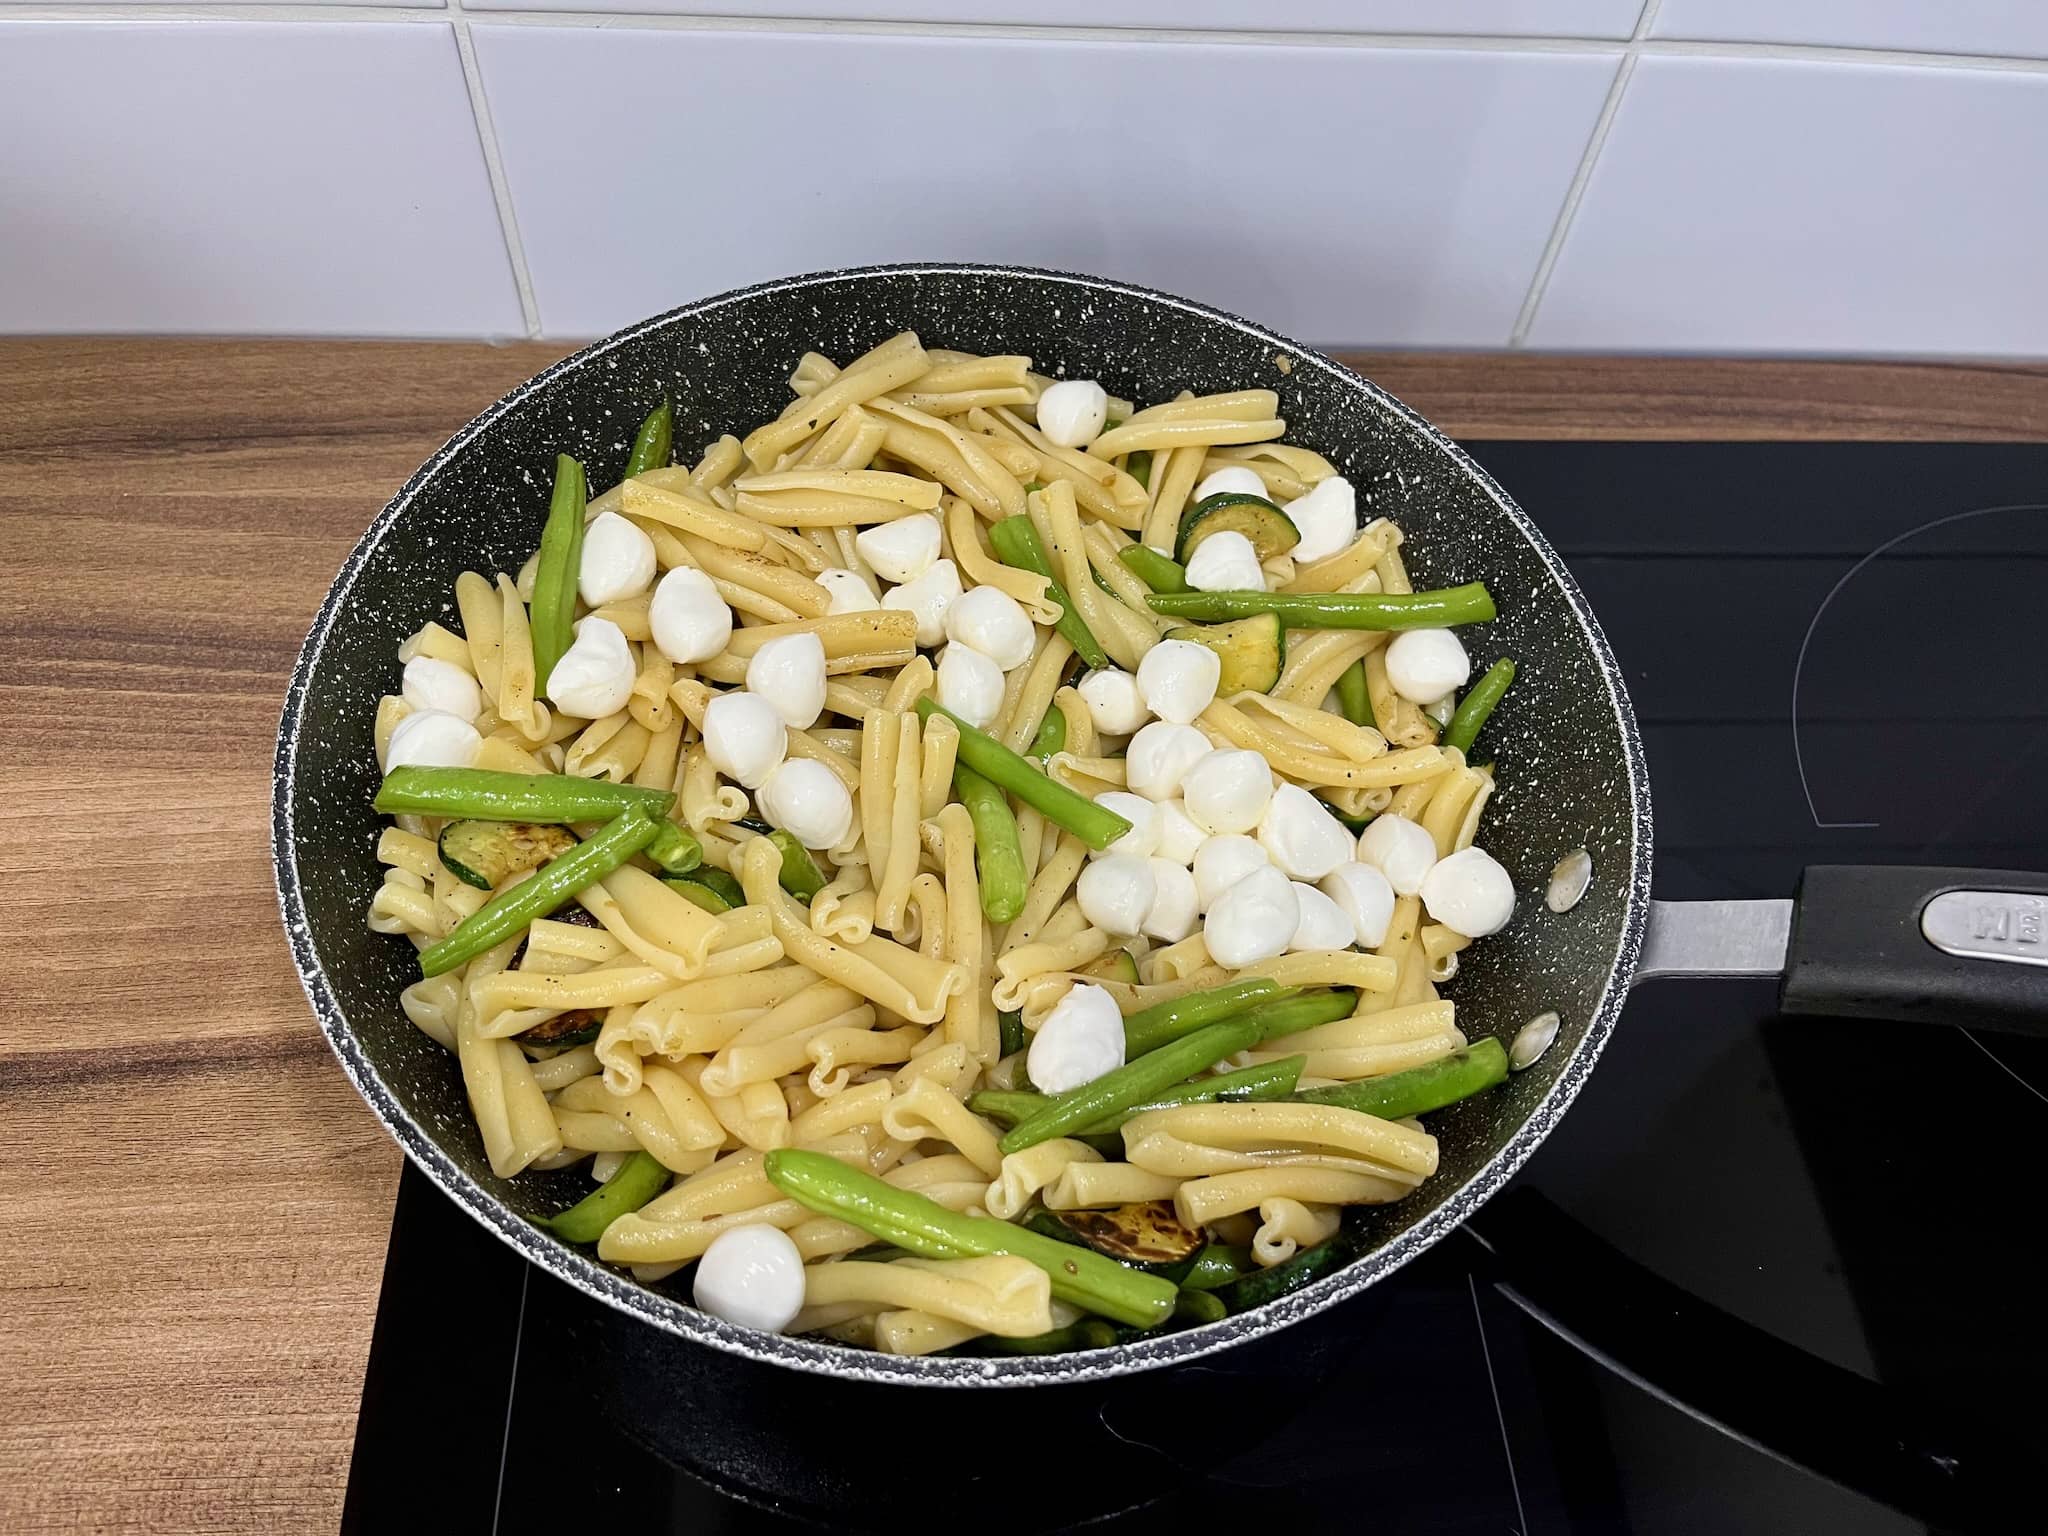 Courgette and green beans together with pasta and mozzarella in a pan